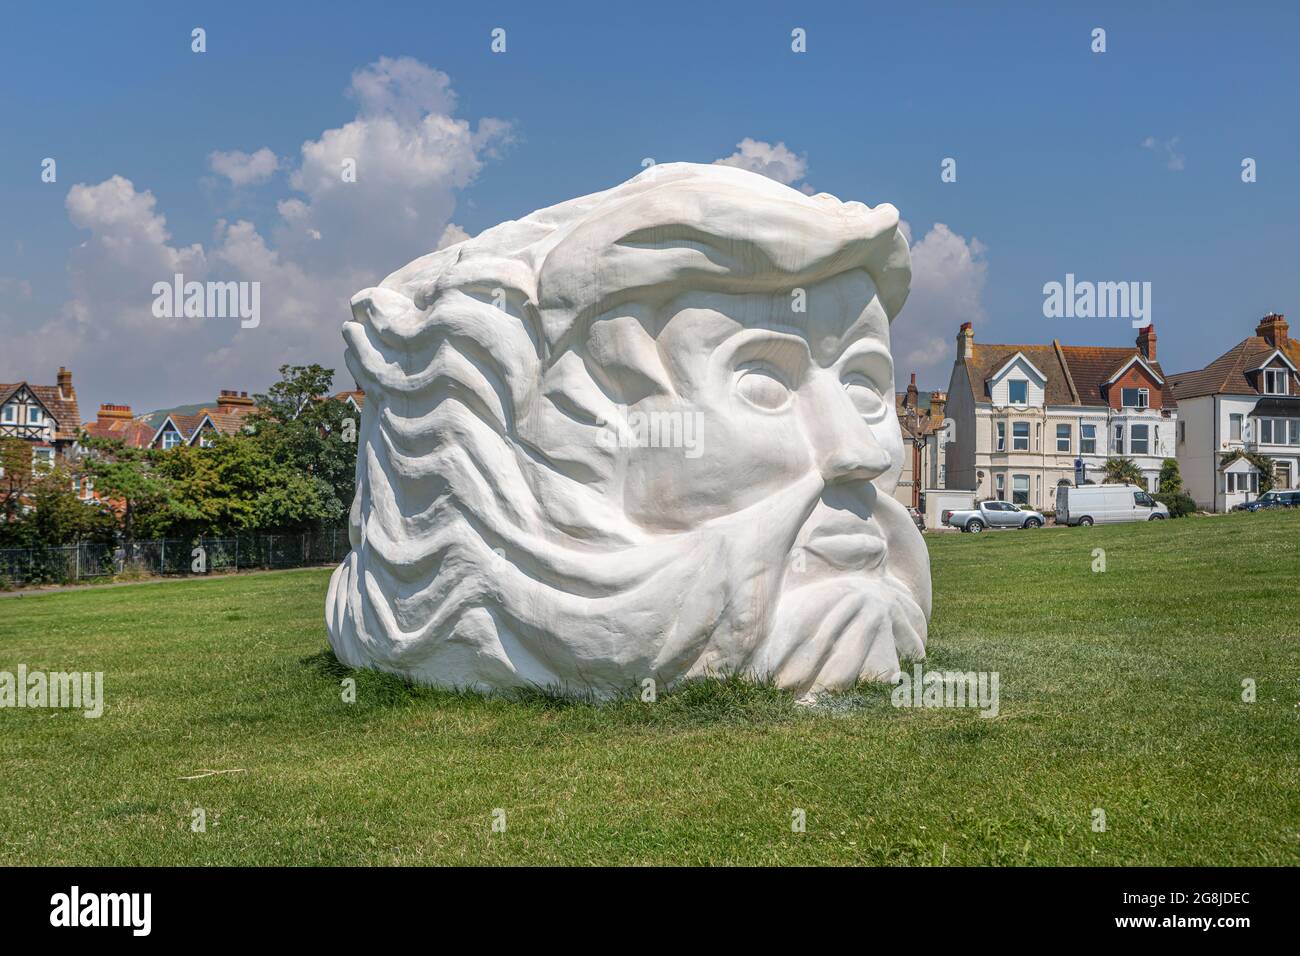 ‘Janus Fortress is a new multifaceted work by Pilar Quinteros located on the cliff-top overlooking the town of Folkestone as part of the 2021 Triennia Stock Photo